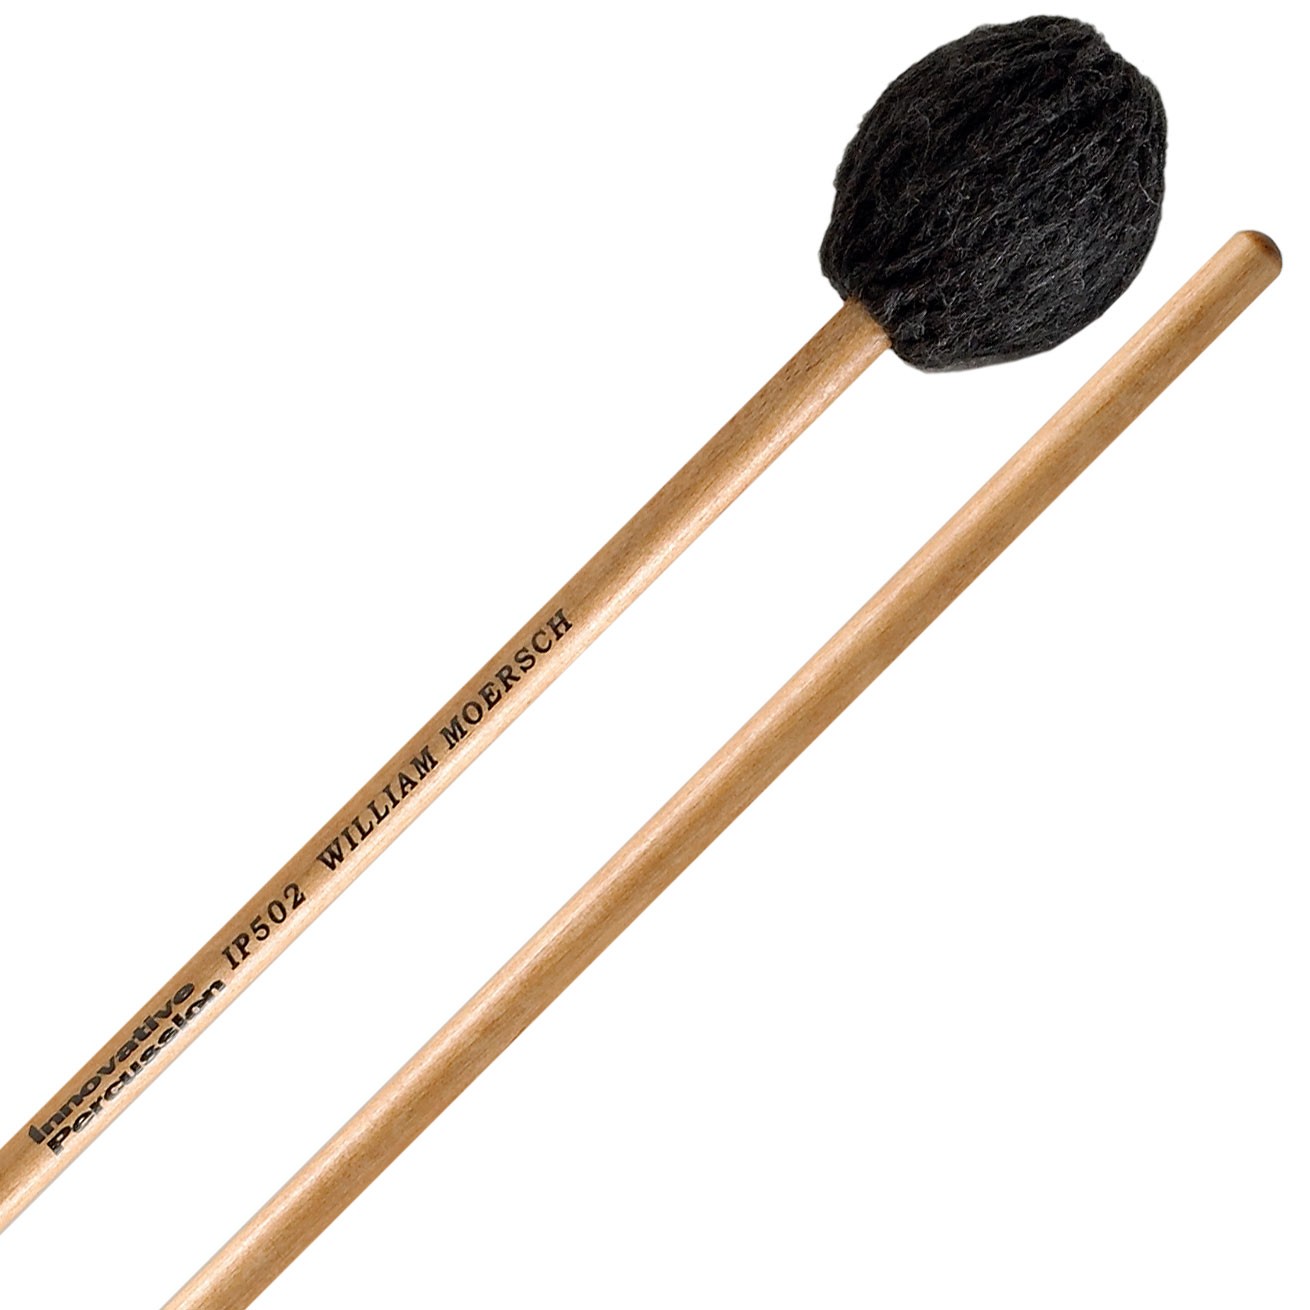 IP502 Innovative Percussion Mallets 